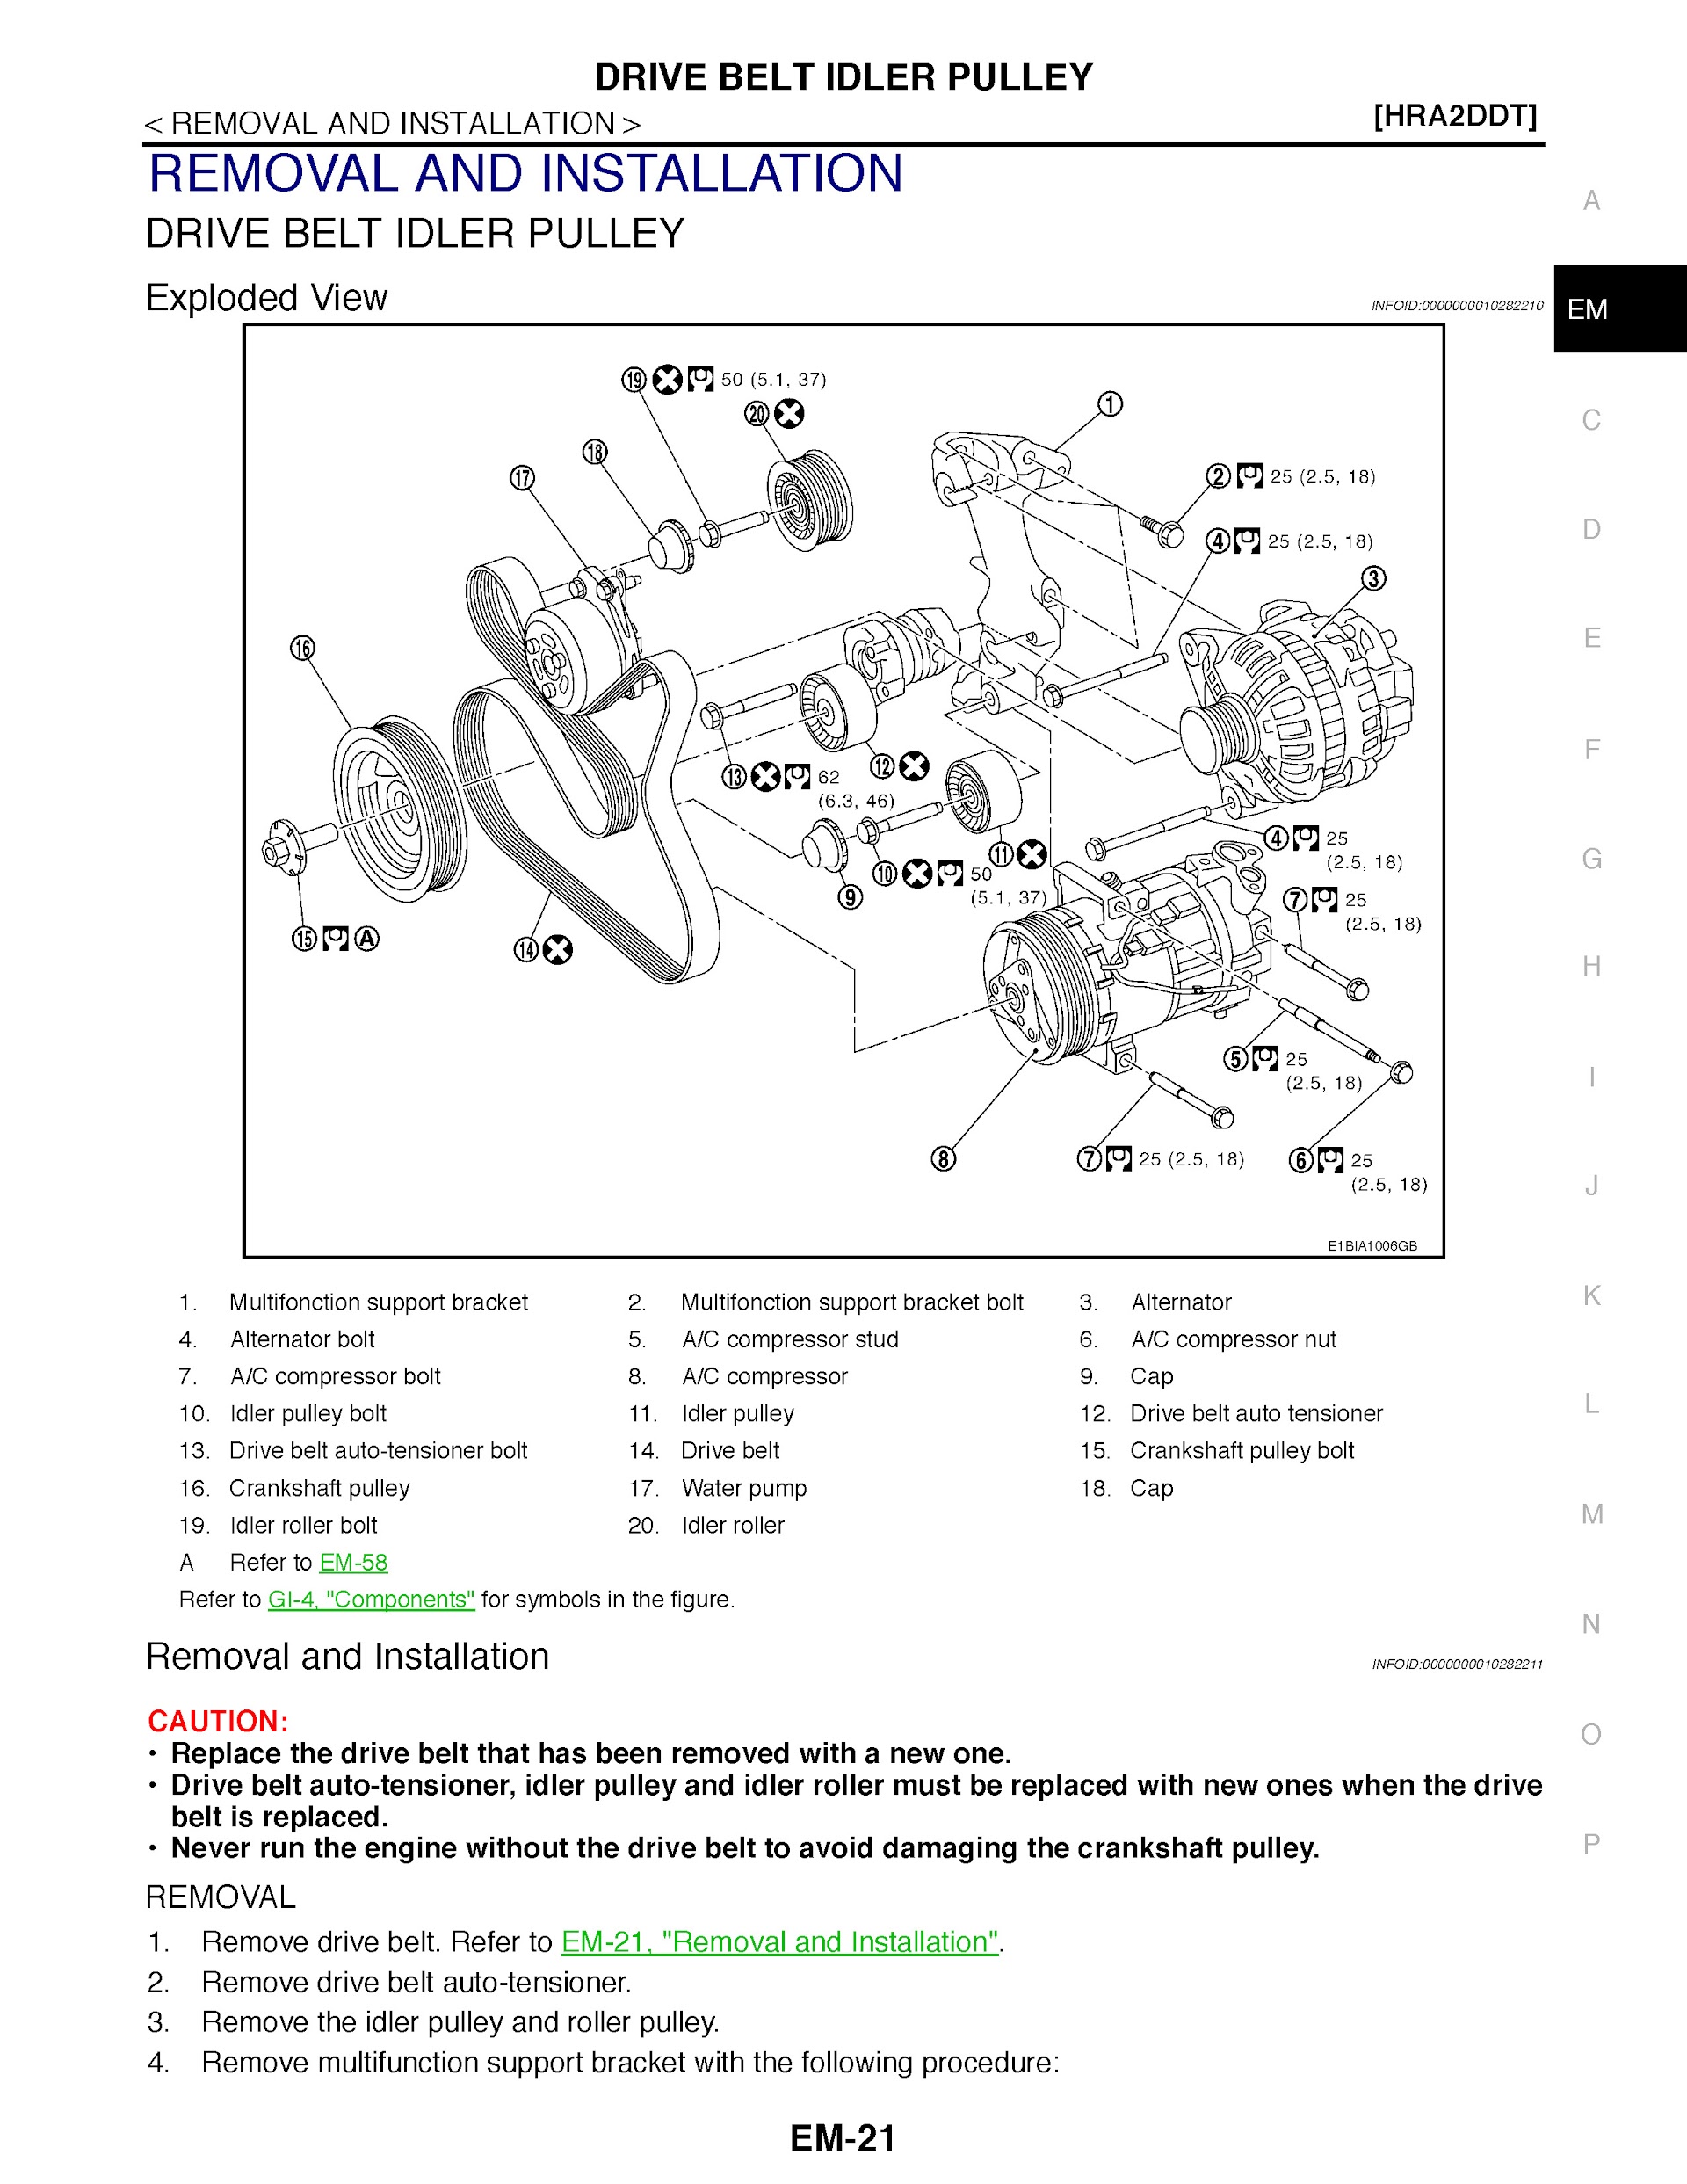 Nissan Qashqai Repair Manual, Drive Belt Idler Pulley Removal and Installation